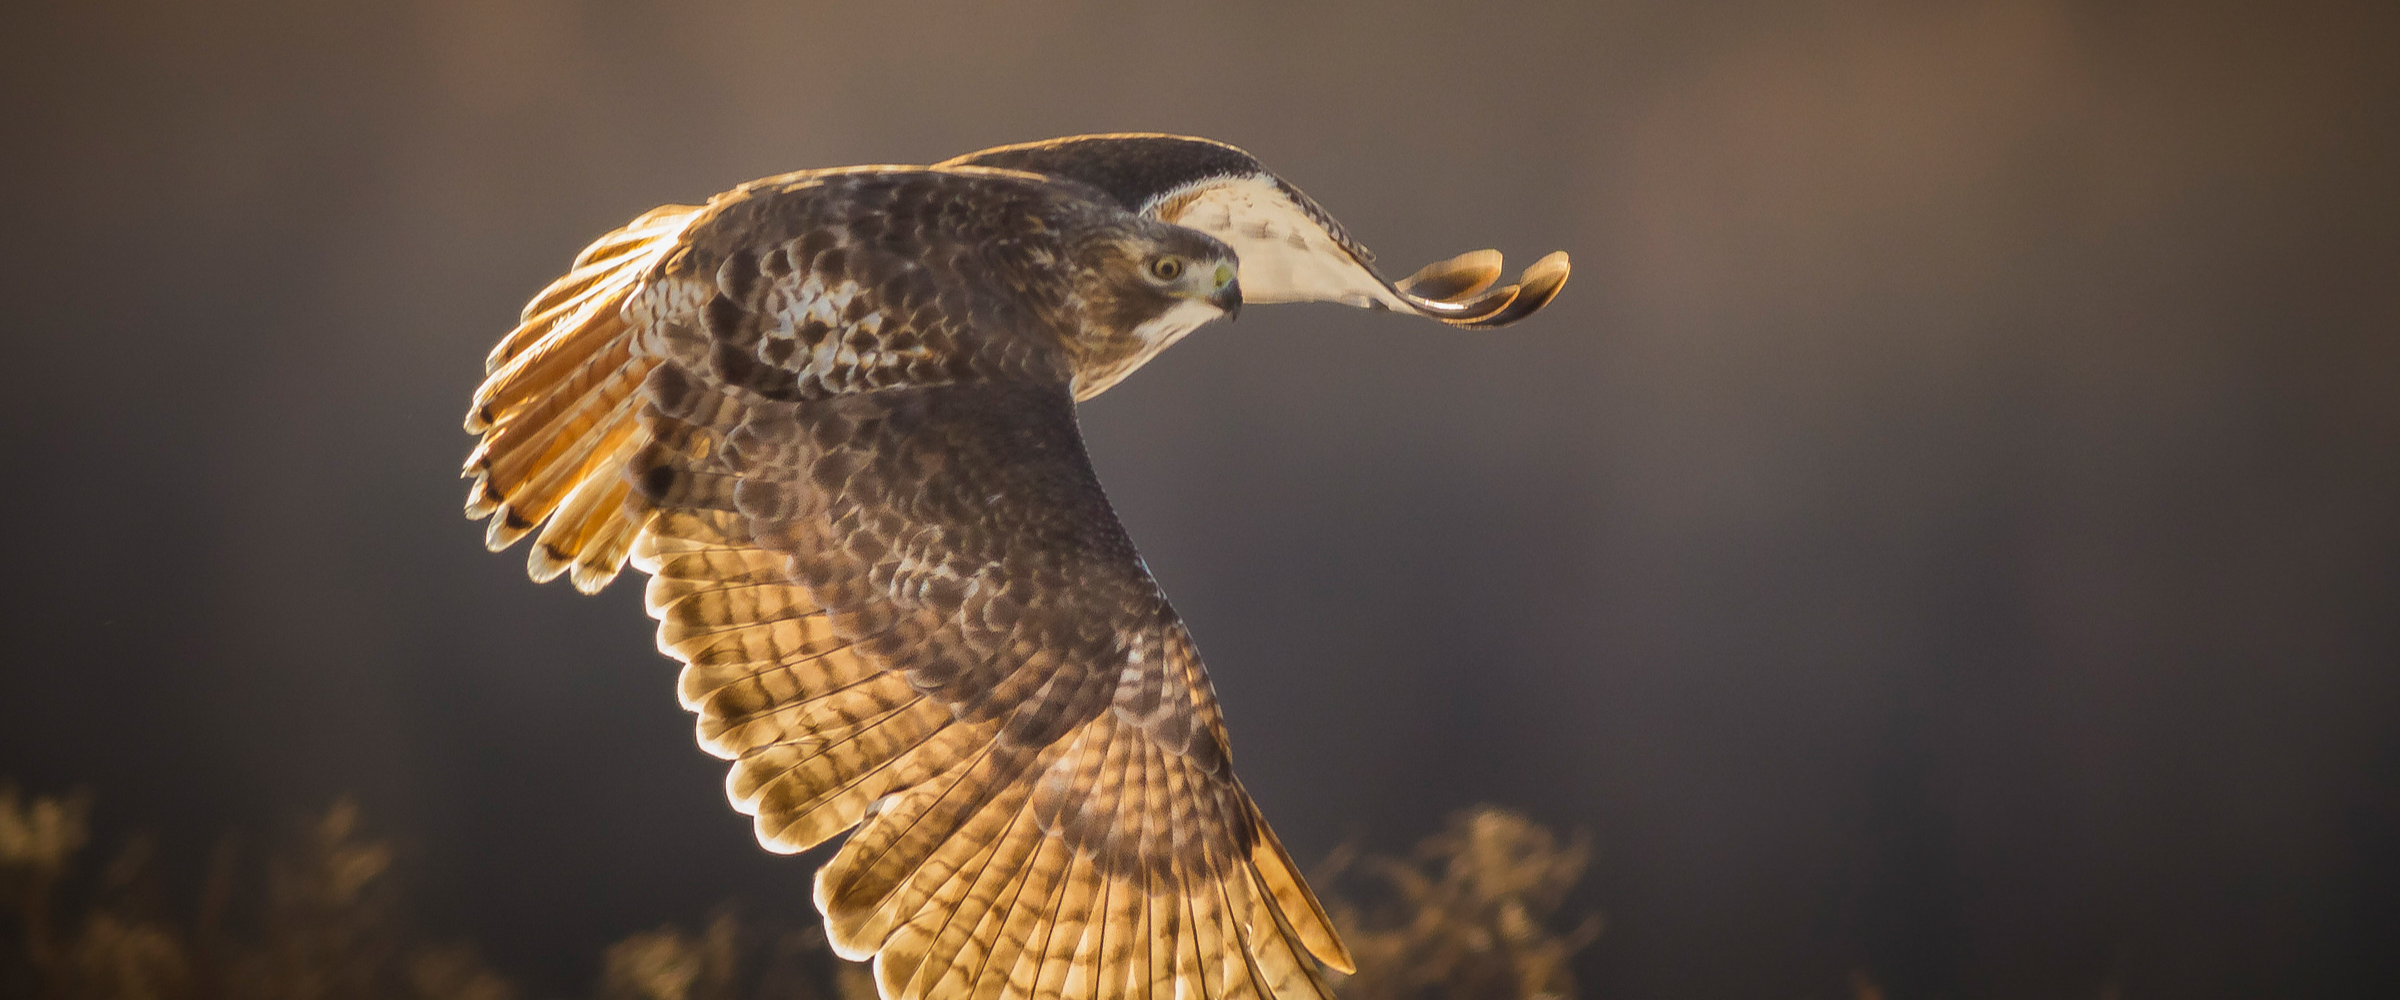 A Red-tailed Hawk in flight, wings down as it flaps. The sunlight gives it a golden glow.